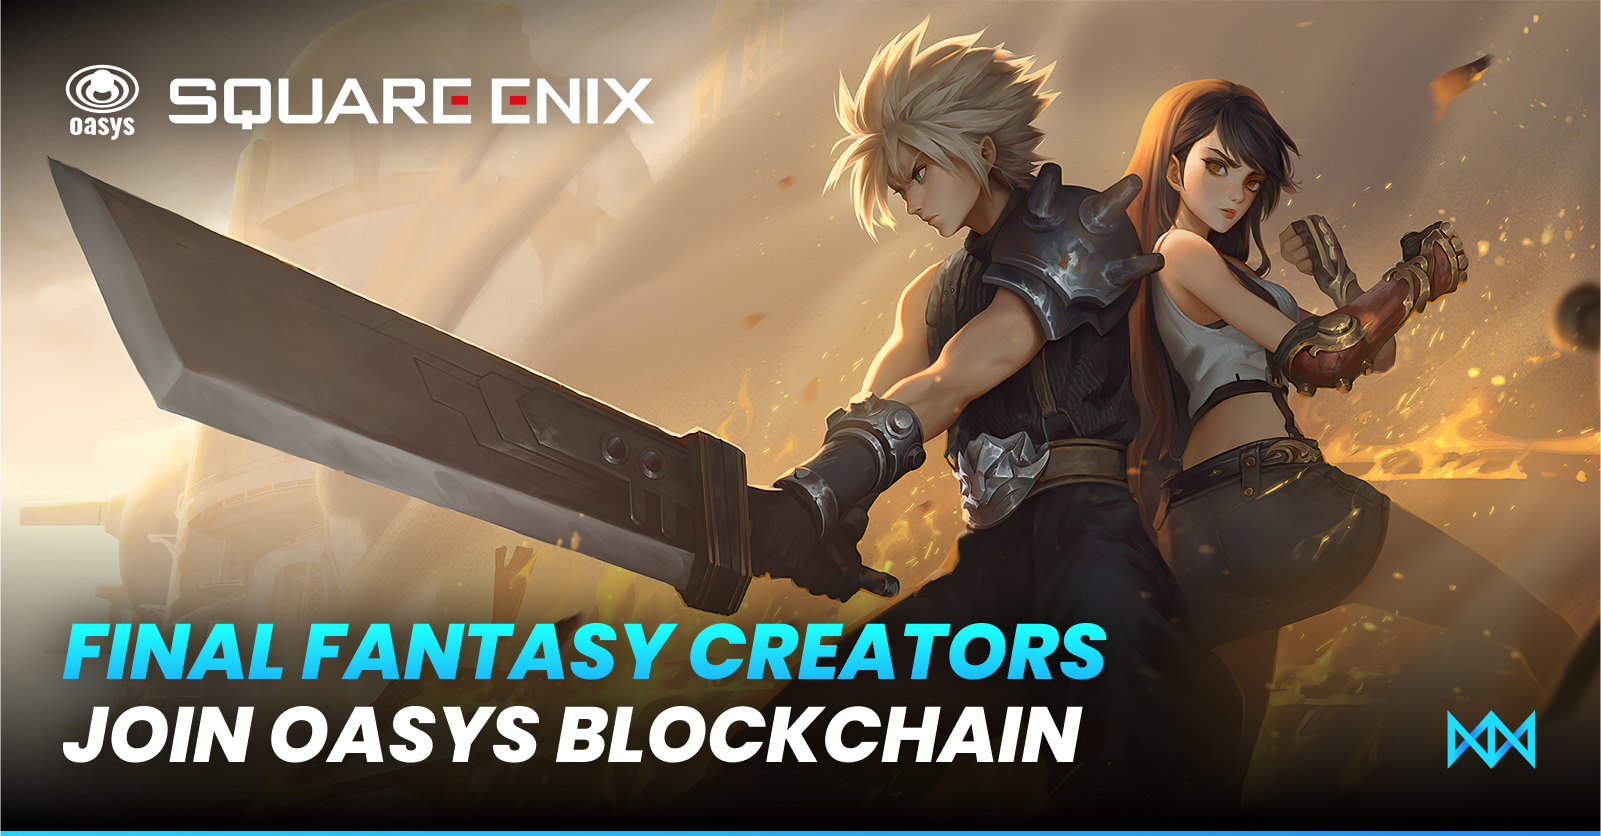 Players Are Concerned Over Square Enix Joining Oasys Blockchain